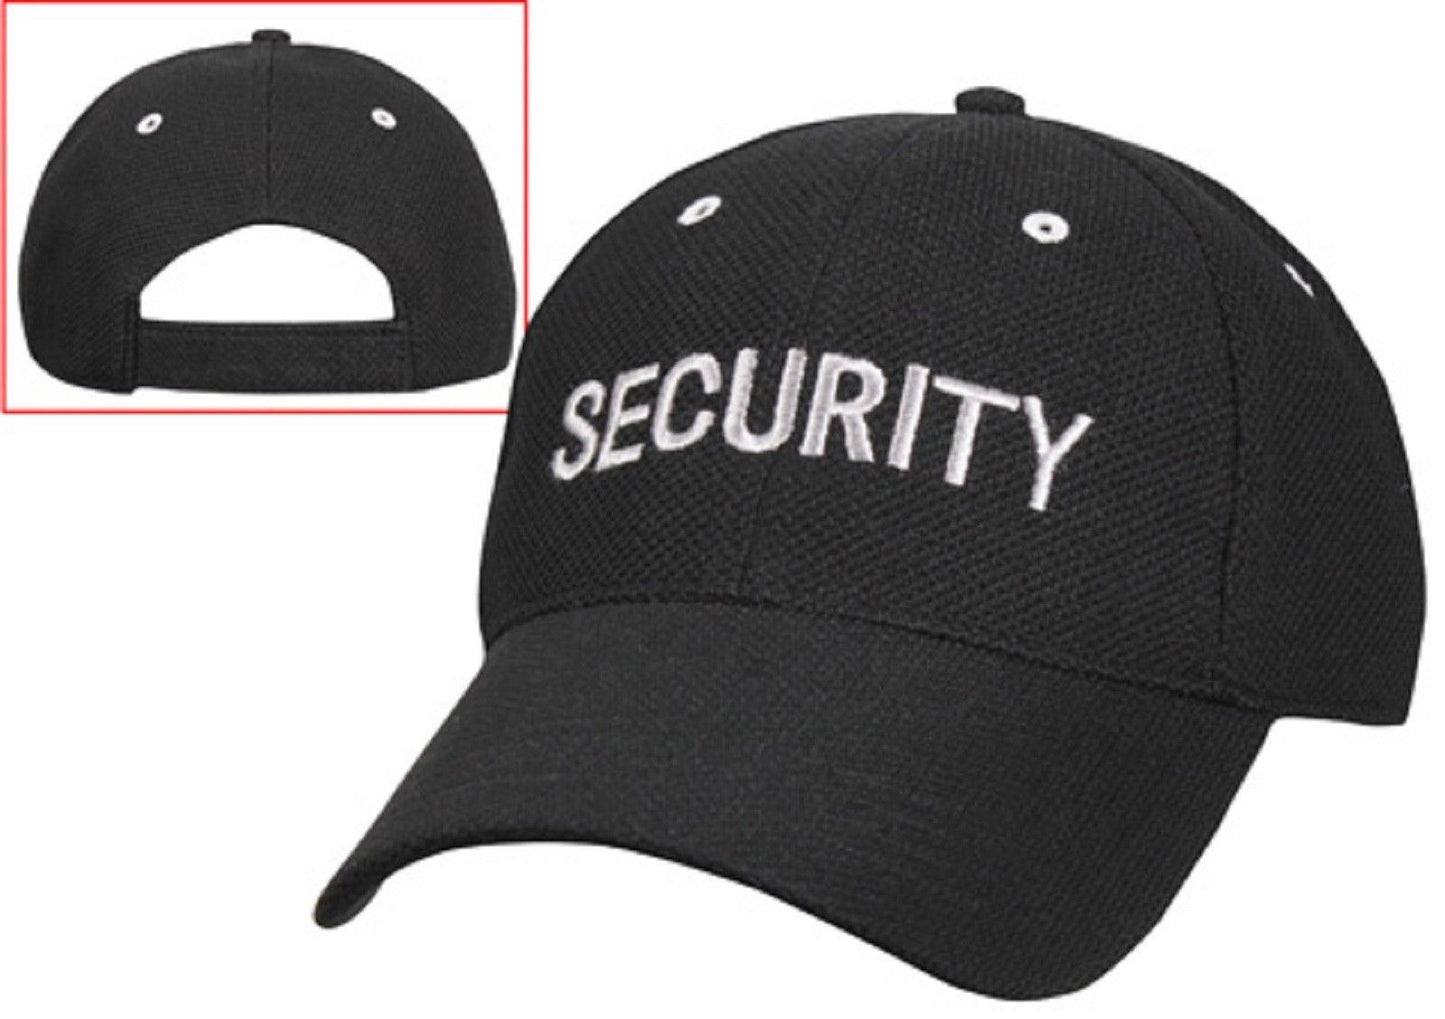 Rothco SECURITY Low Profile Mesh Cap w/ Hook and Loop Closure - Adjustable Fit